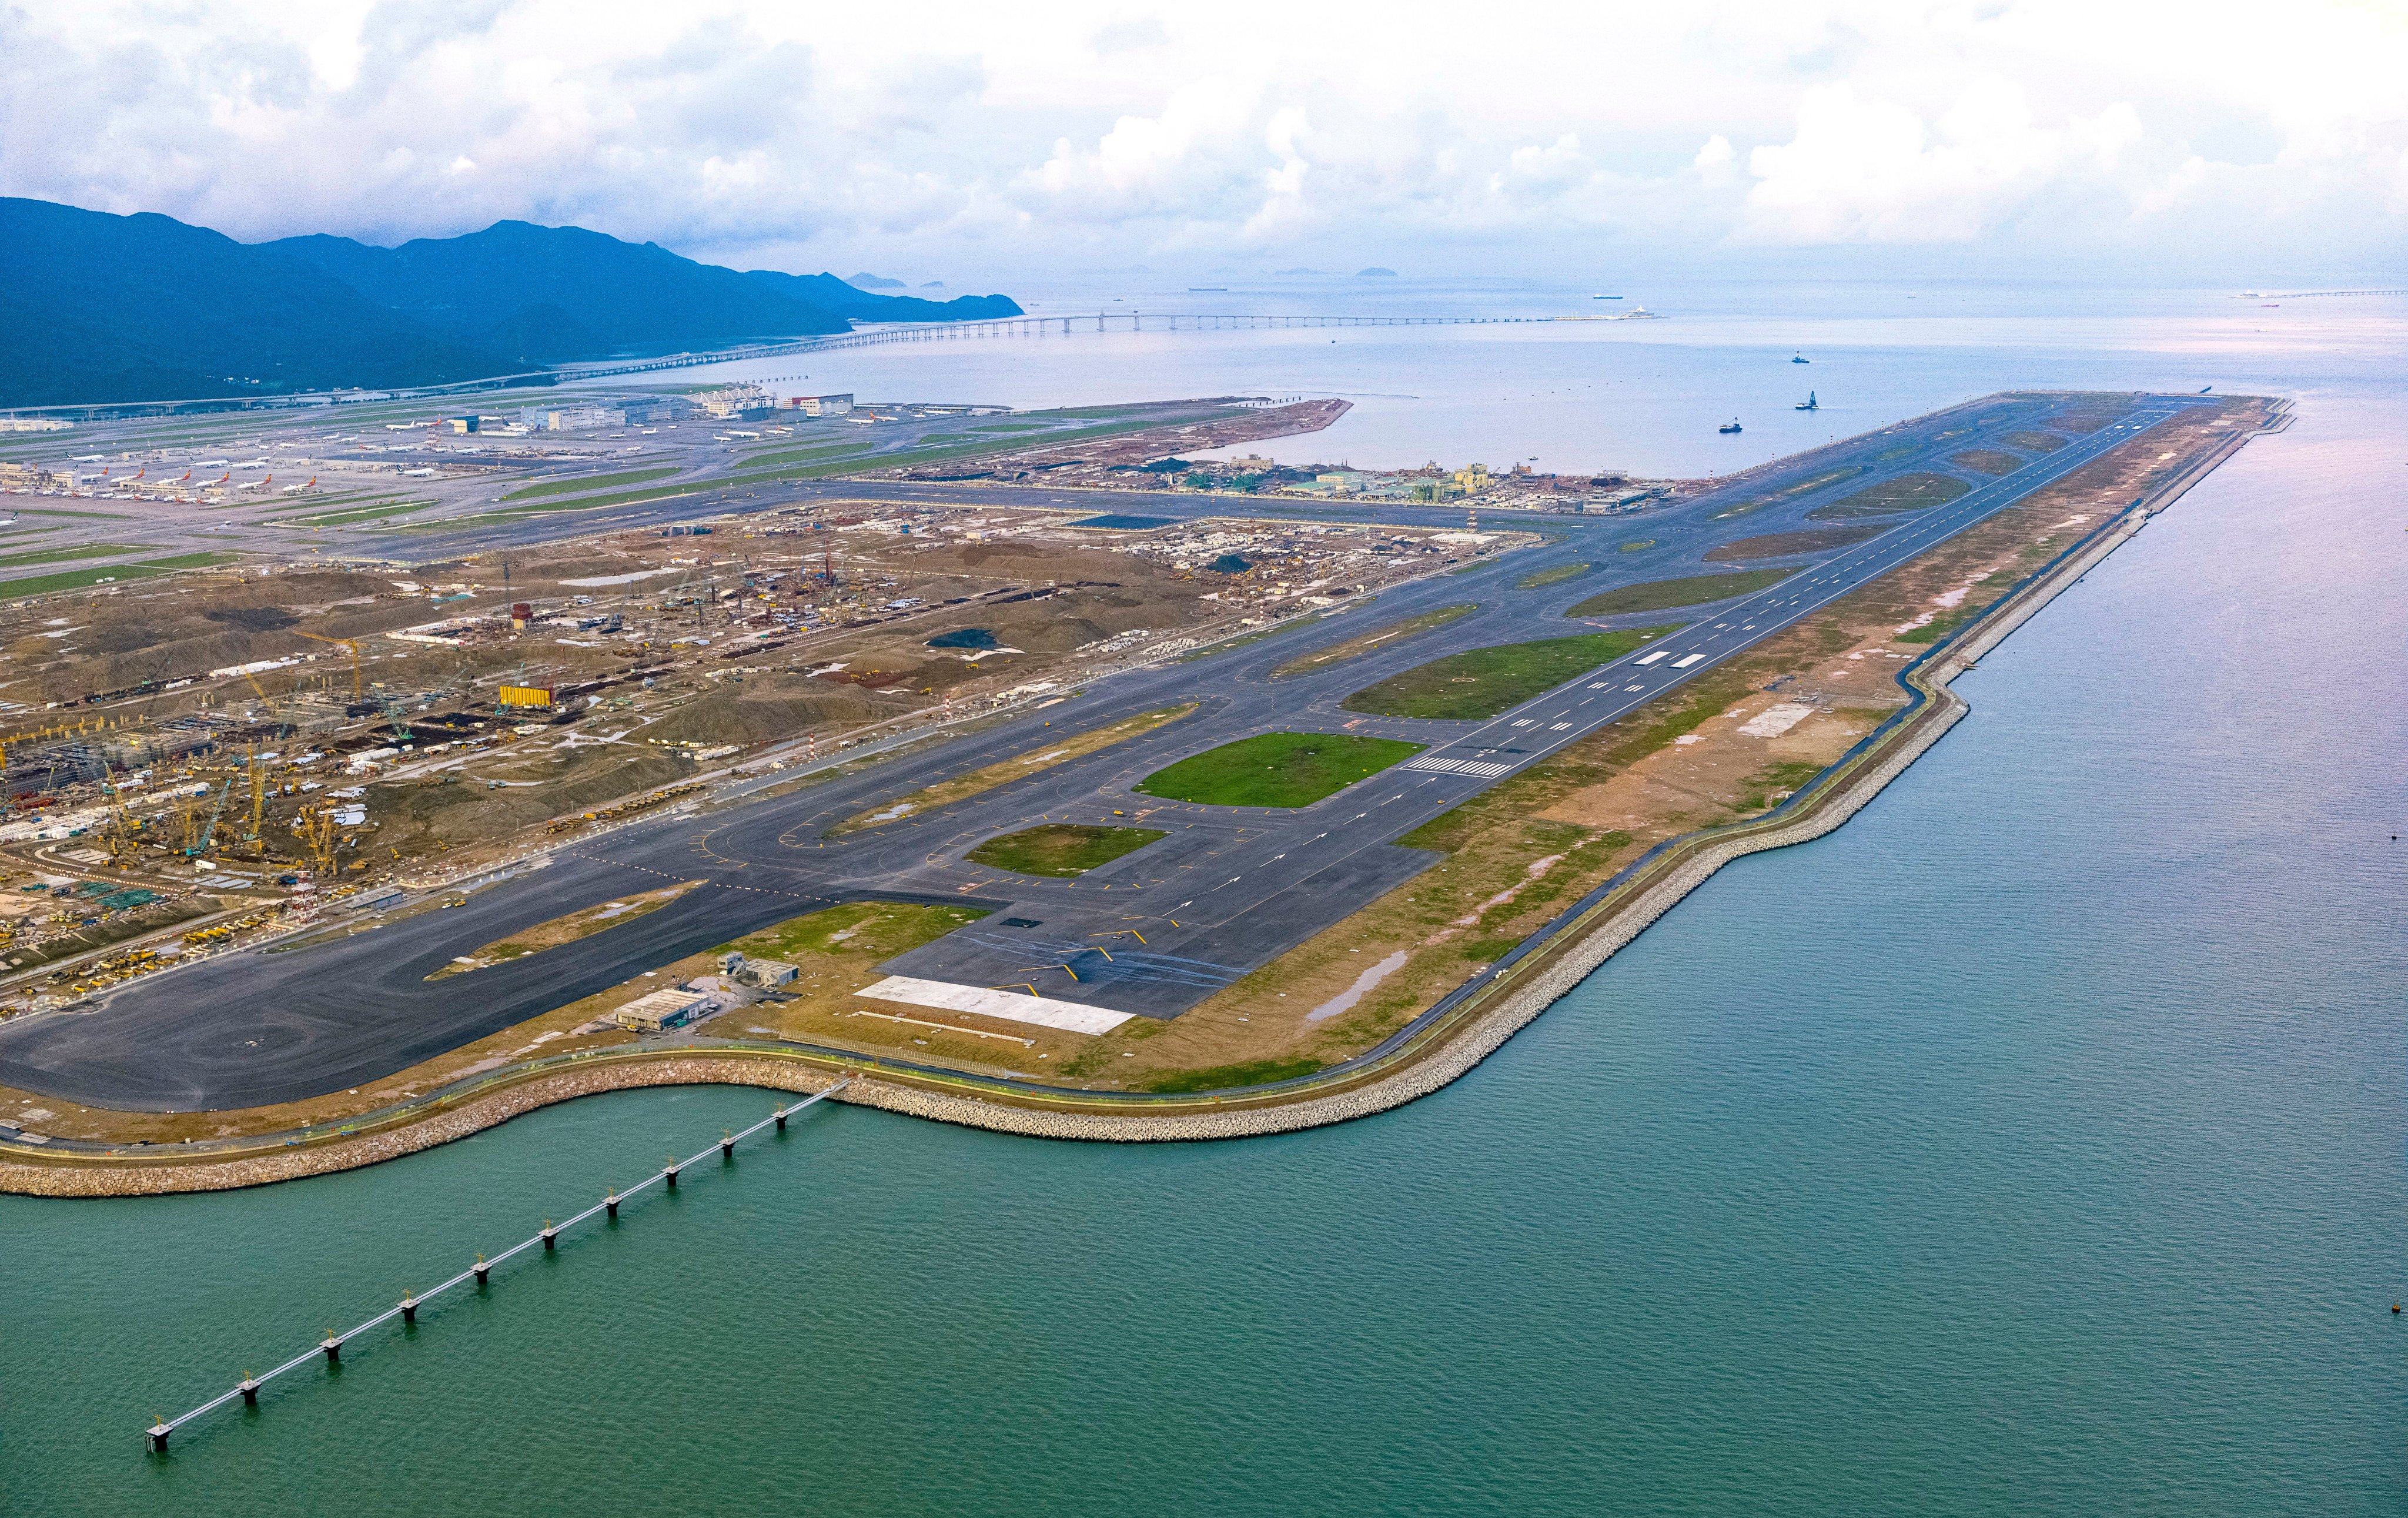 Hong Kong’s anti-graft agency has arrested 30 people in connection with bribes related to awarding contracts for the airport’s third runway project. Photo: Handout